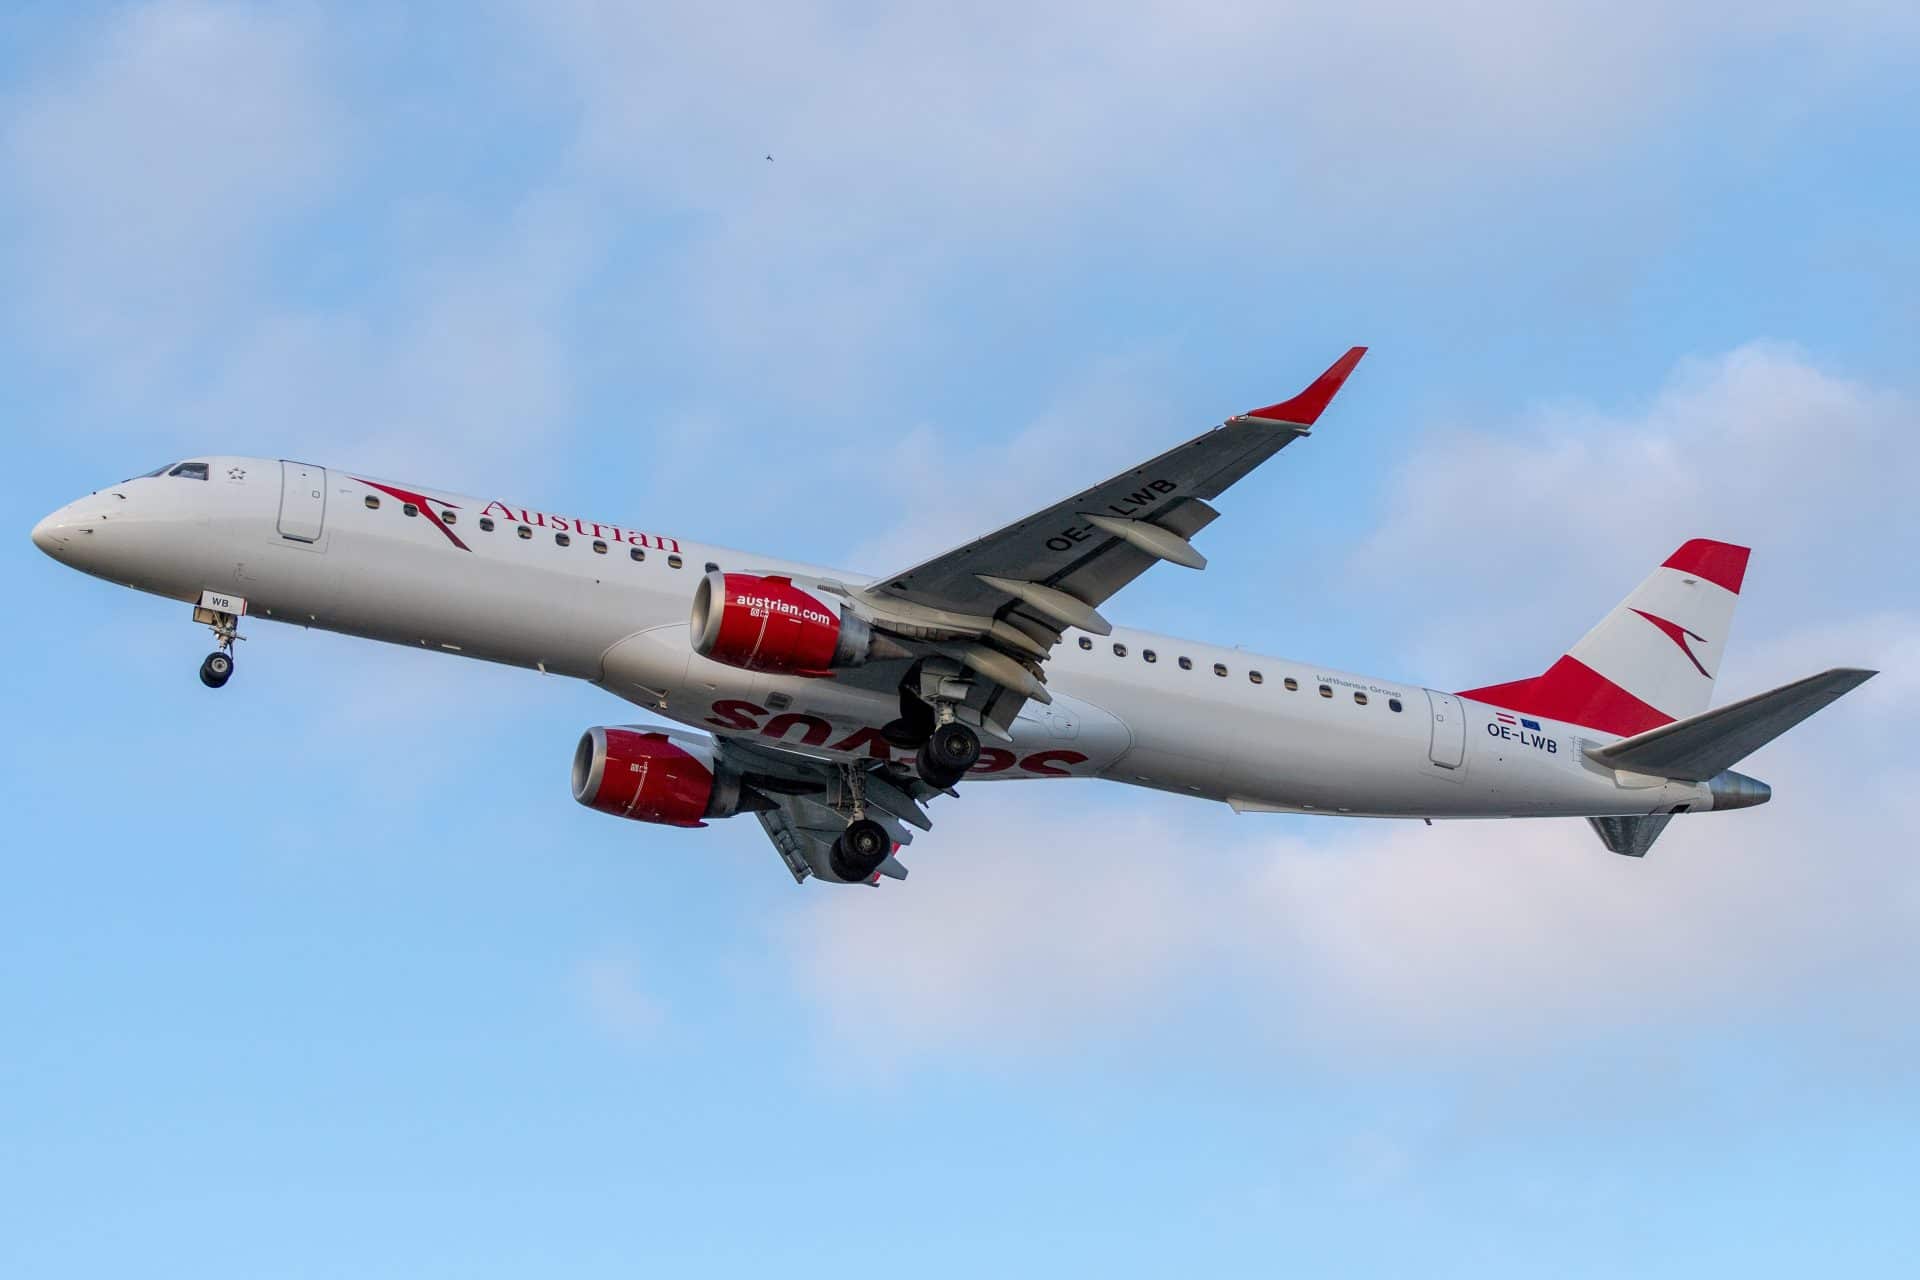 Austrian Airlines Embraer